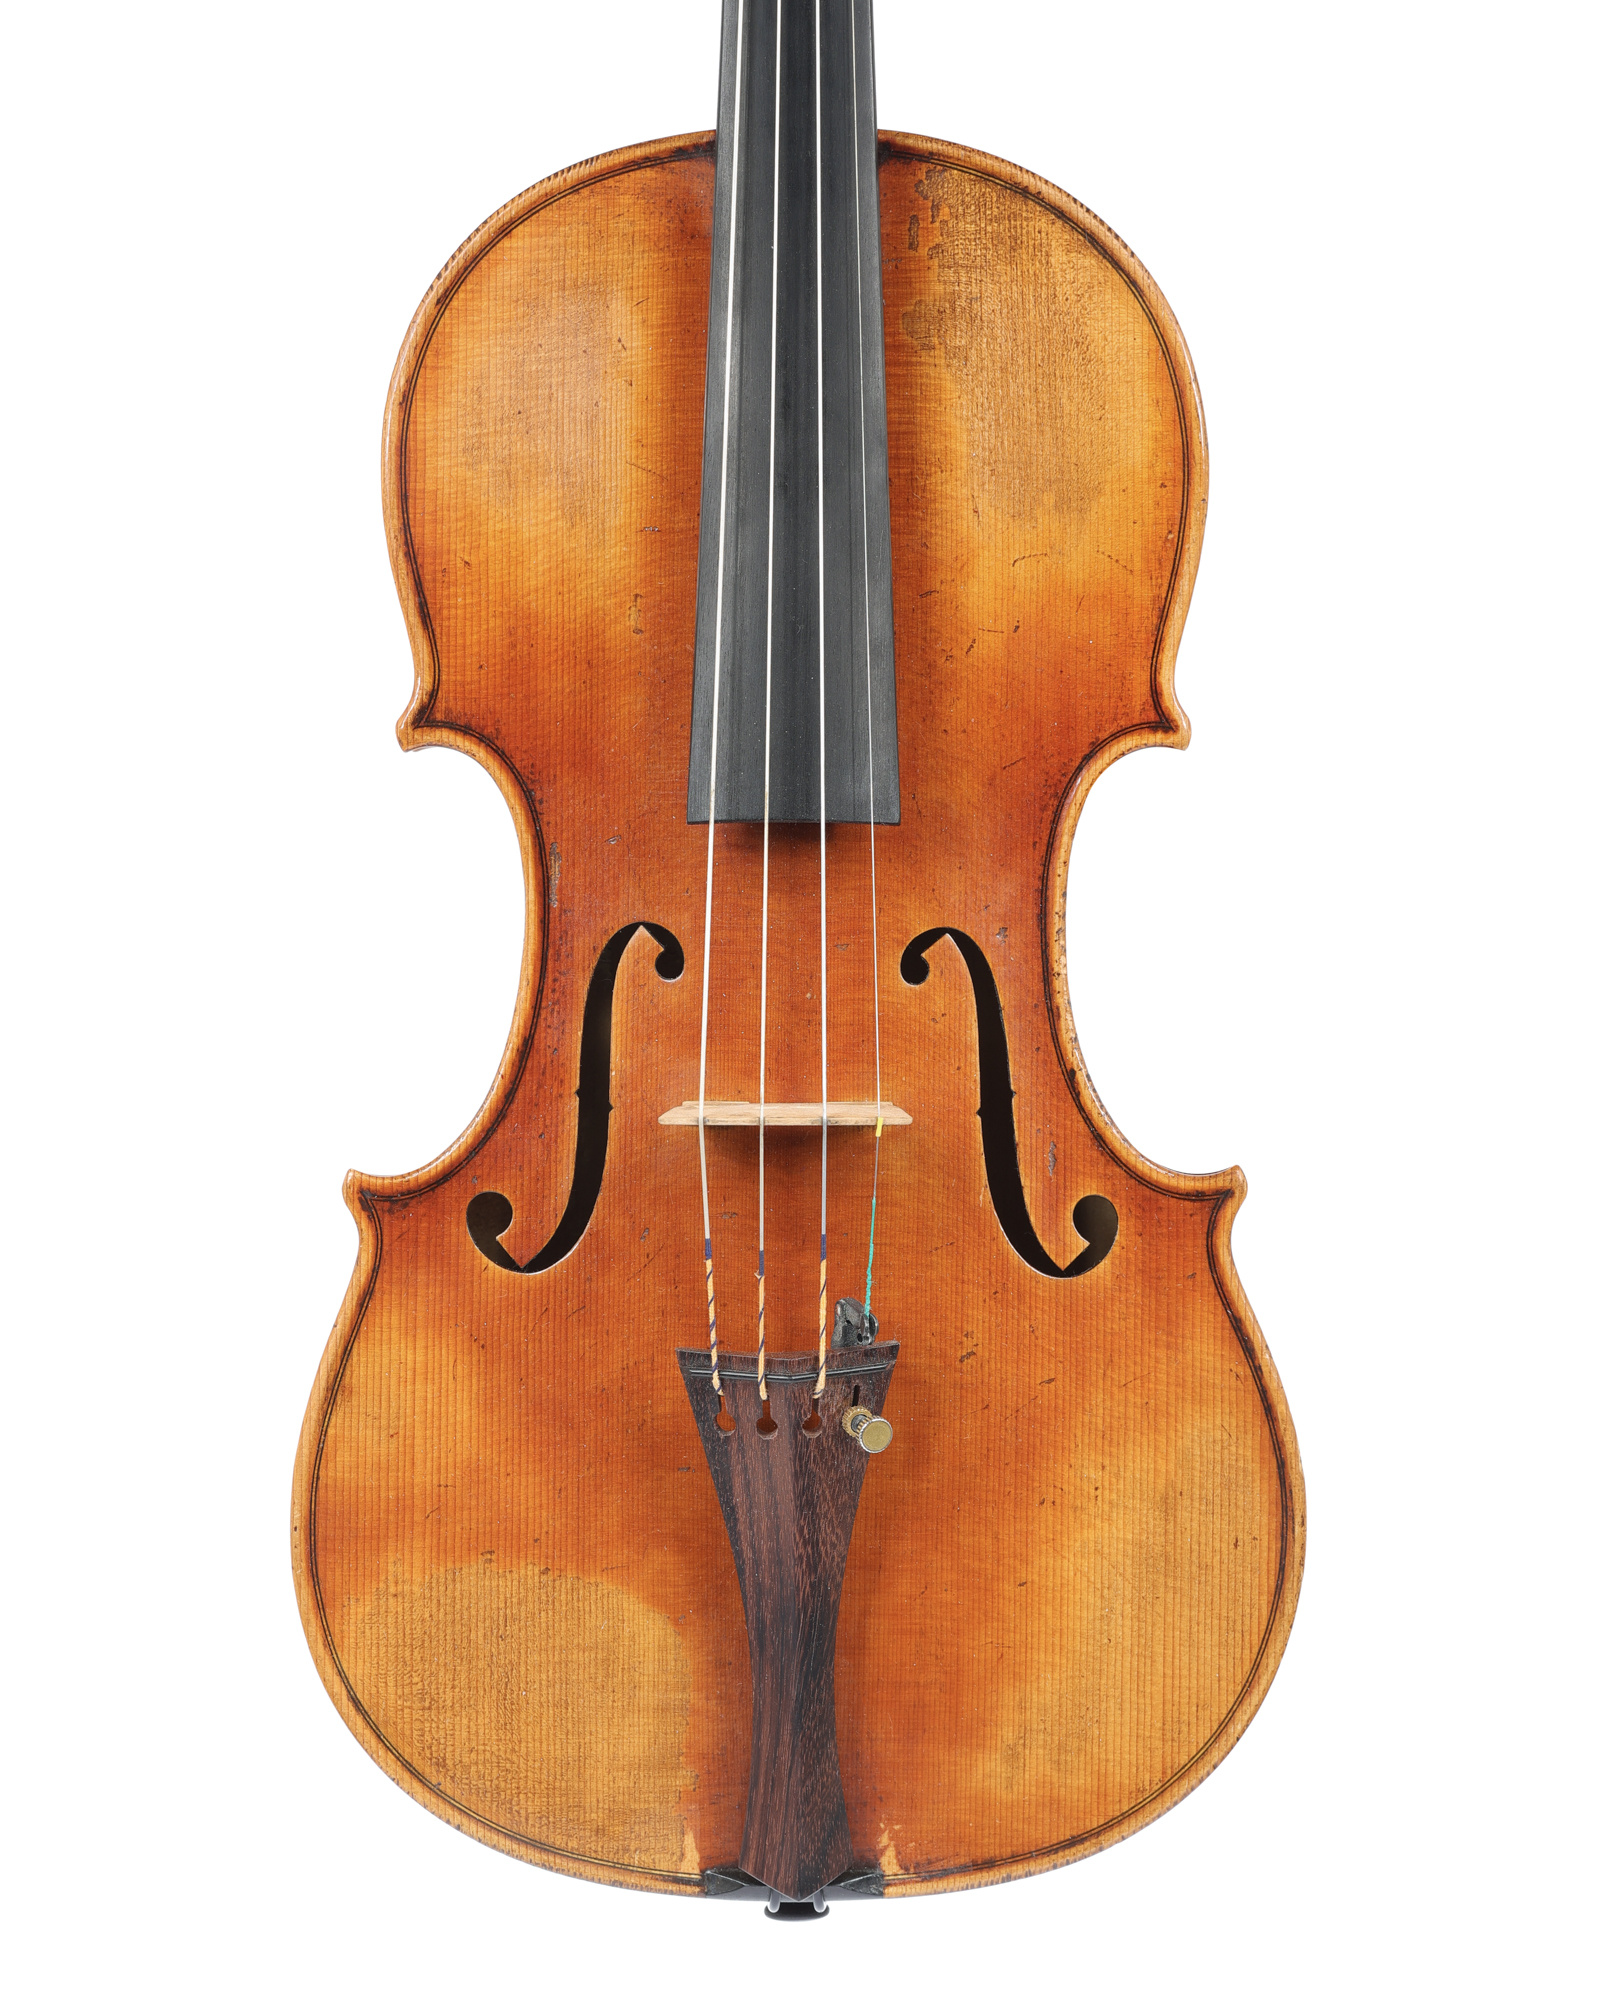 Unlabeled antiqued violin, Fine quality with two-piece back.  Branded 3841 internally